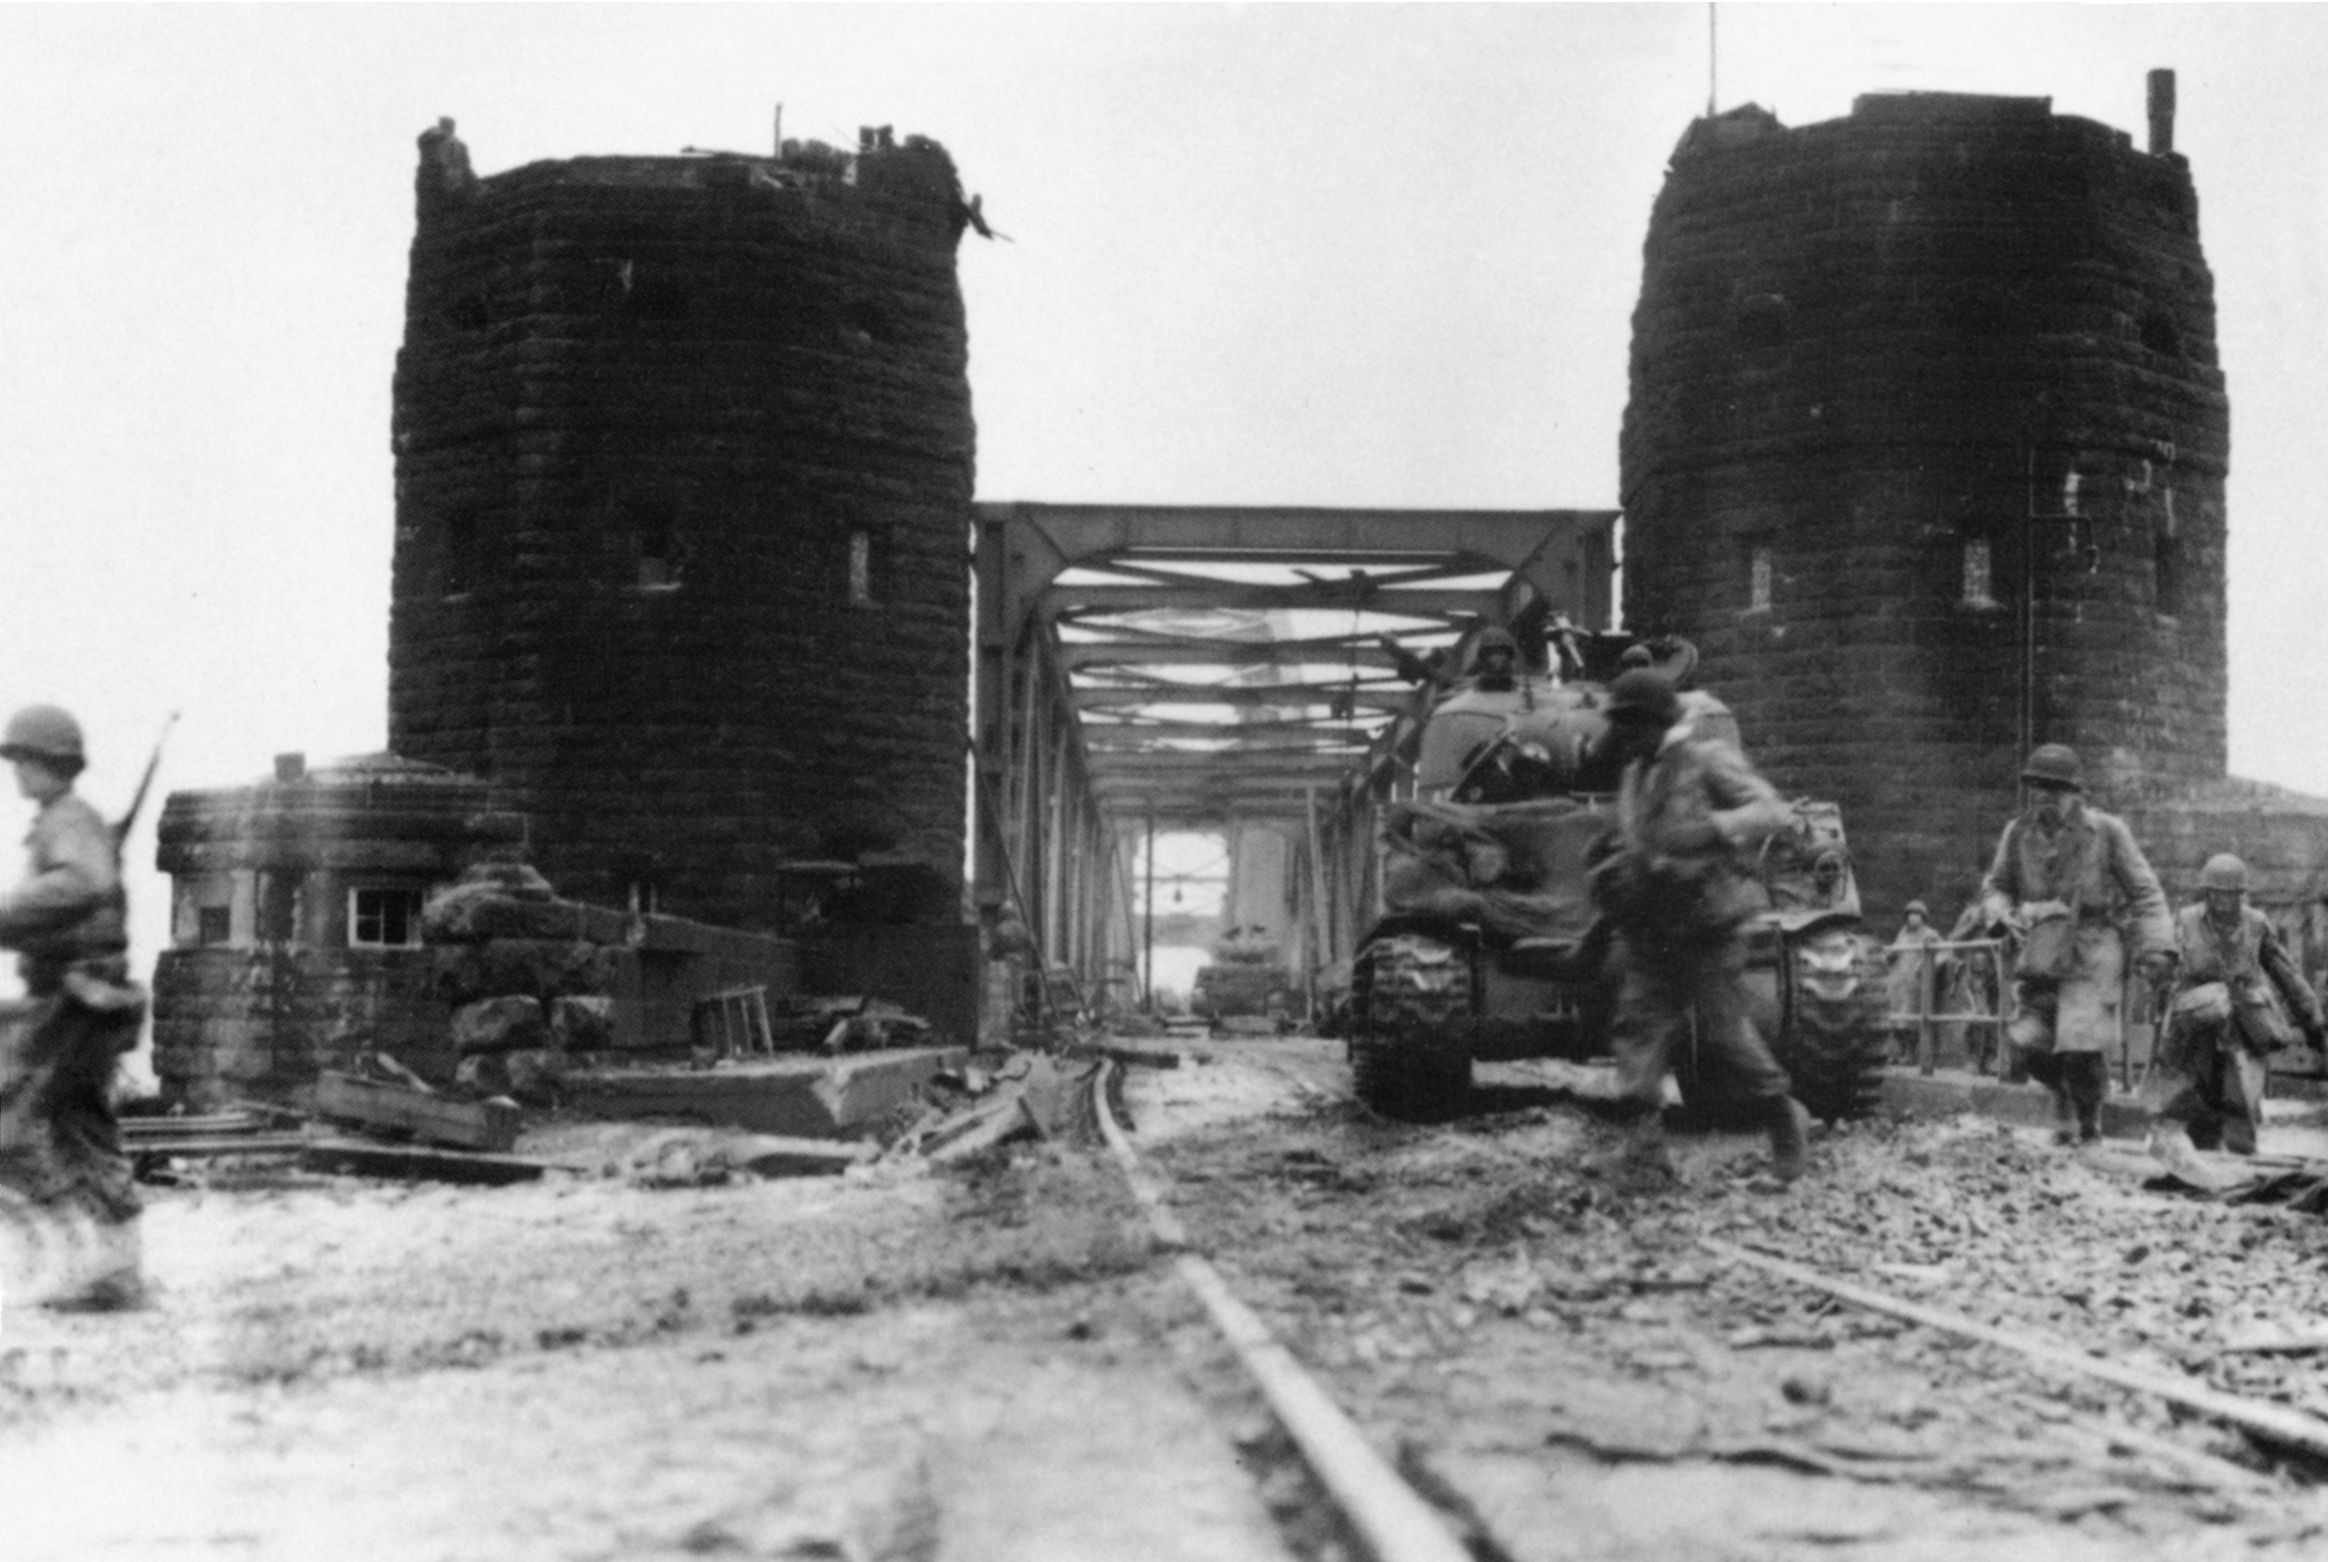 After its capture, First Army pushes troops over the bridge to establish a bridgehead on the eastern bank of the river. Here infantrymen and M4 tanks move across on March 11.